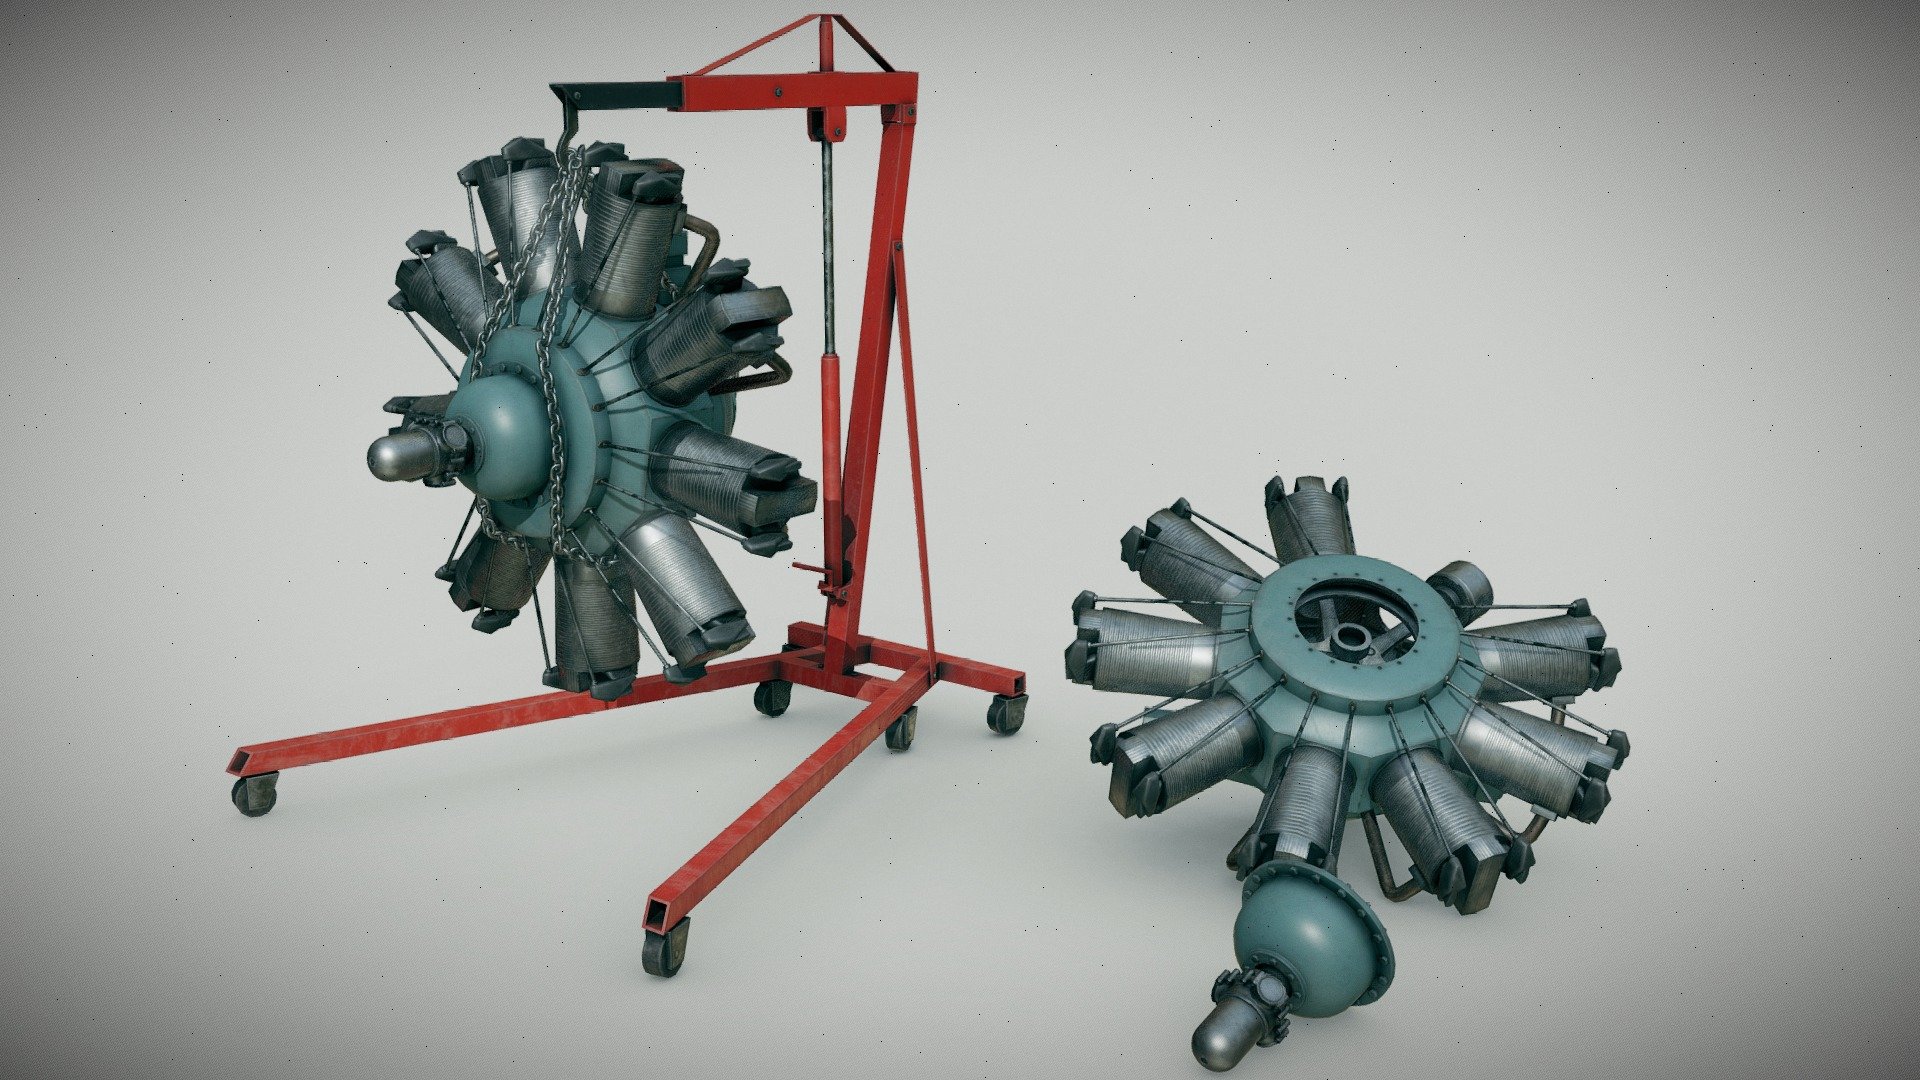 The radial engine is a reciprocating type internal combustion engine configuration in which the cylinders &ldquo;radiate